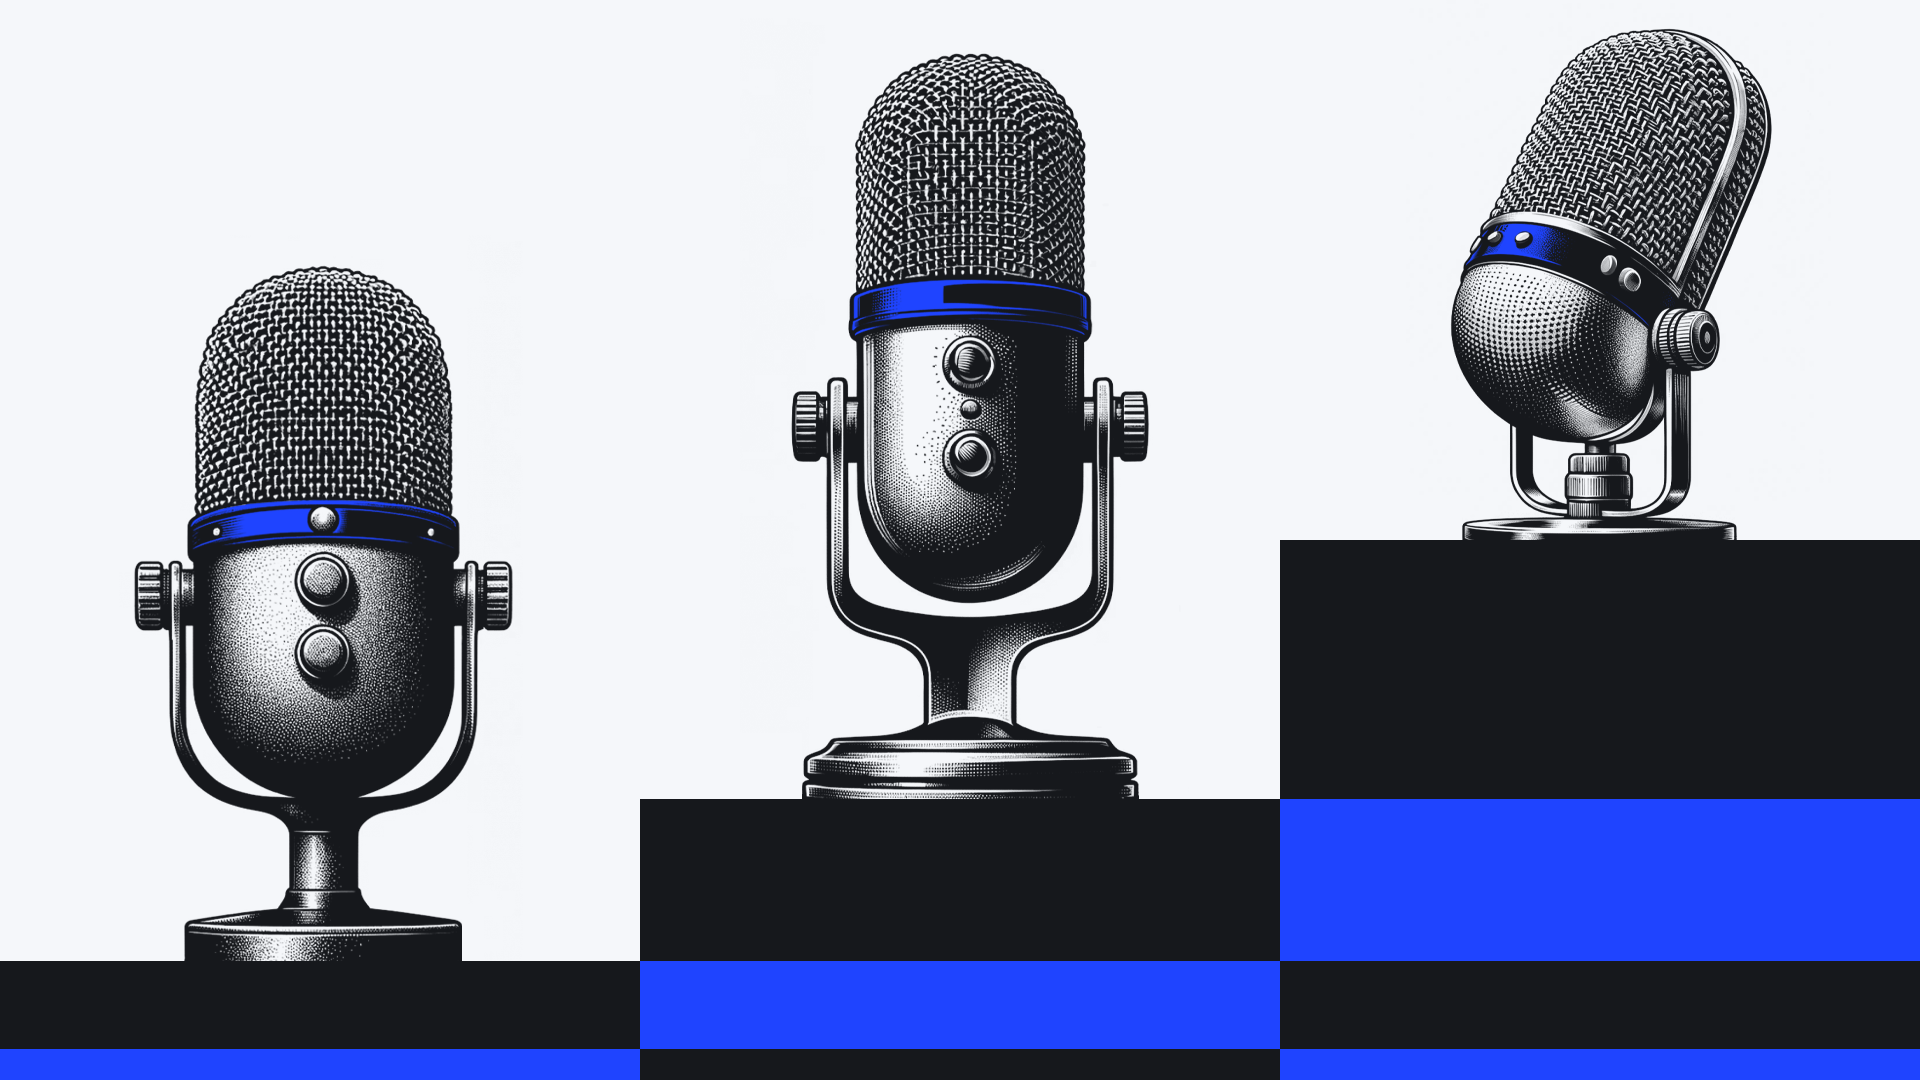 Three vintage microphones against a black and white background with blue stripes.